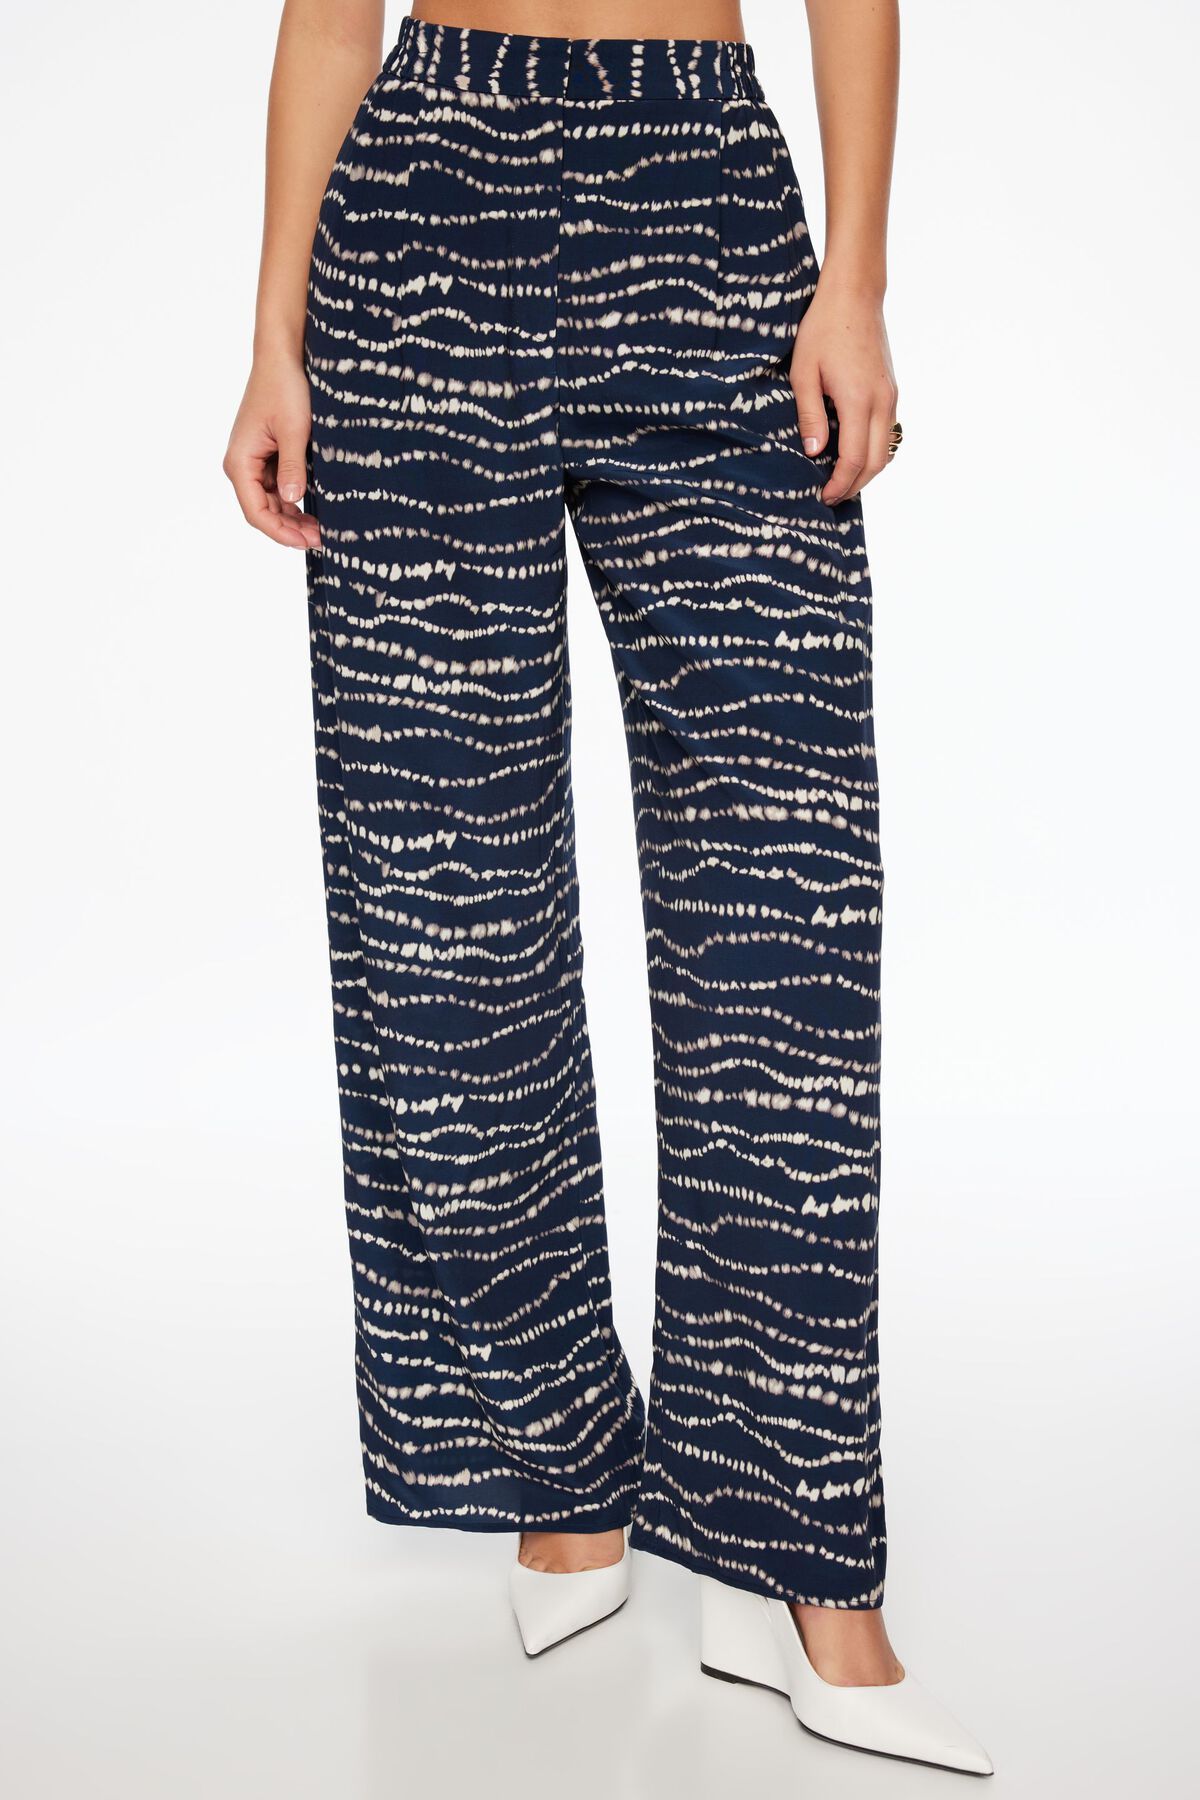 Coast to Crest in Anika Convertible Pant